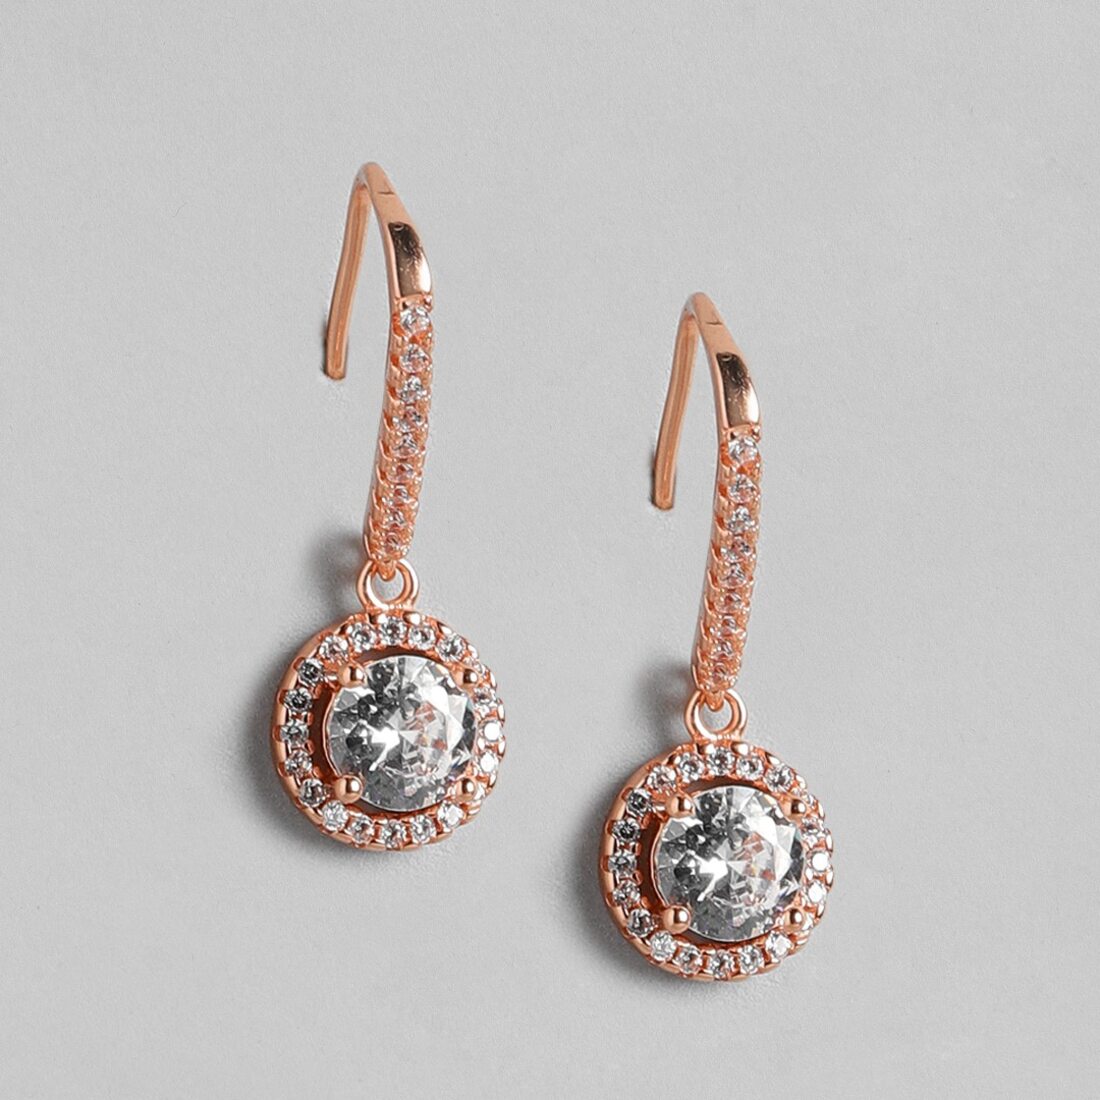 Rose Gold Radiance Love - Infinity & Solitaire Earrings Sterling Silver Combo